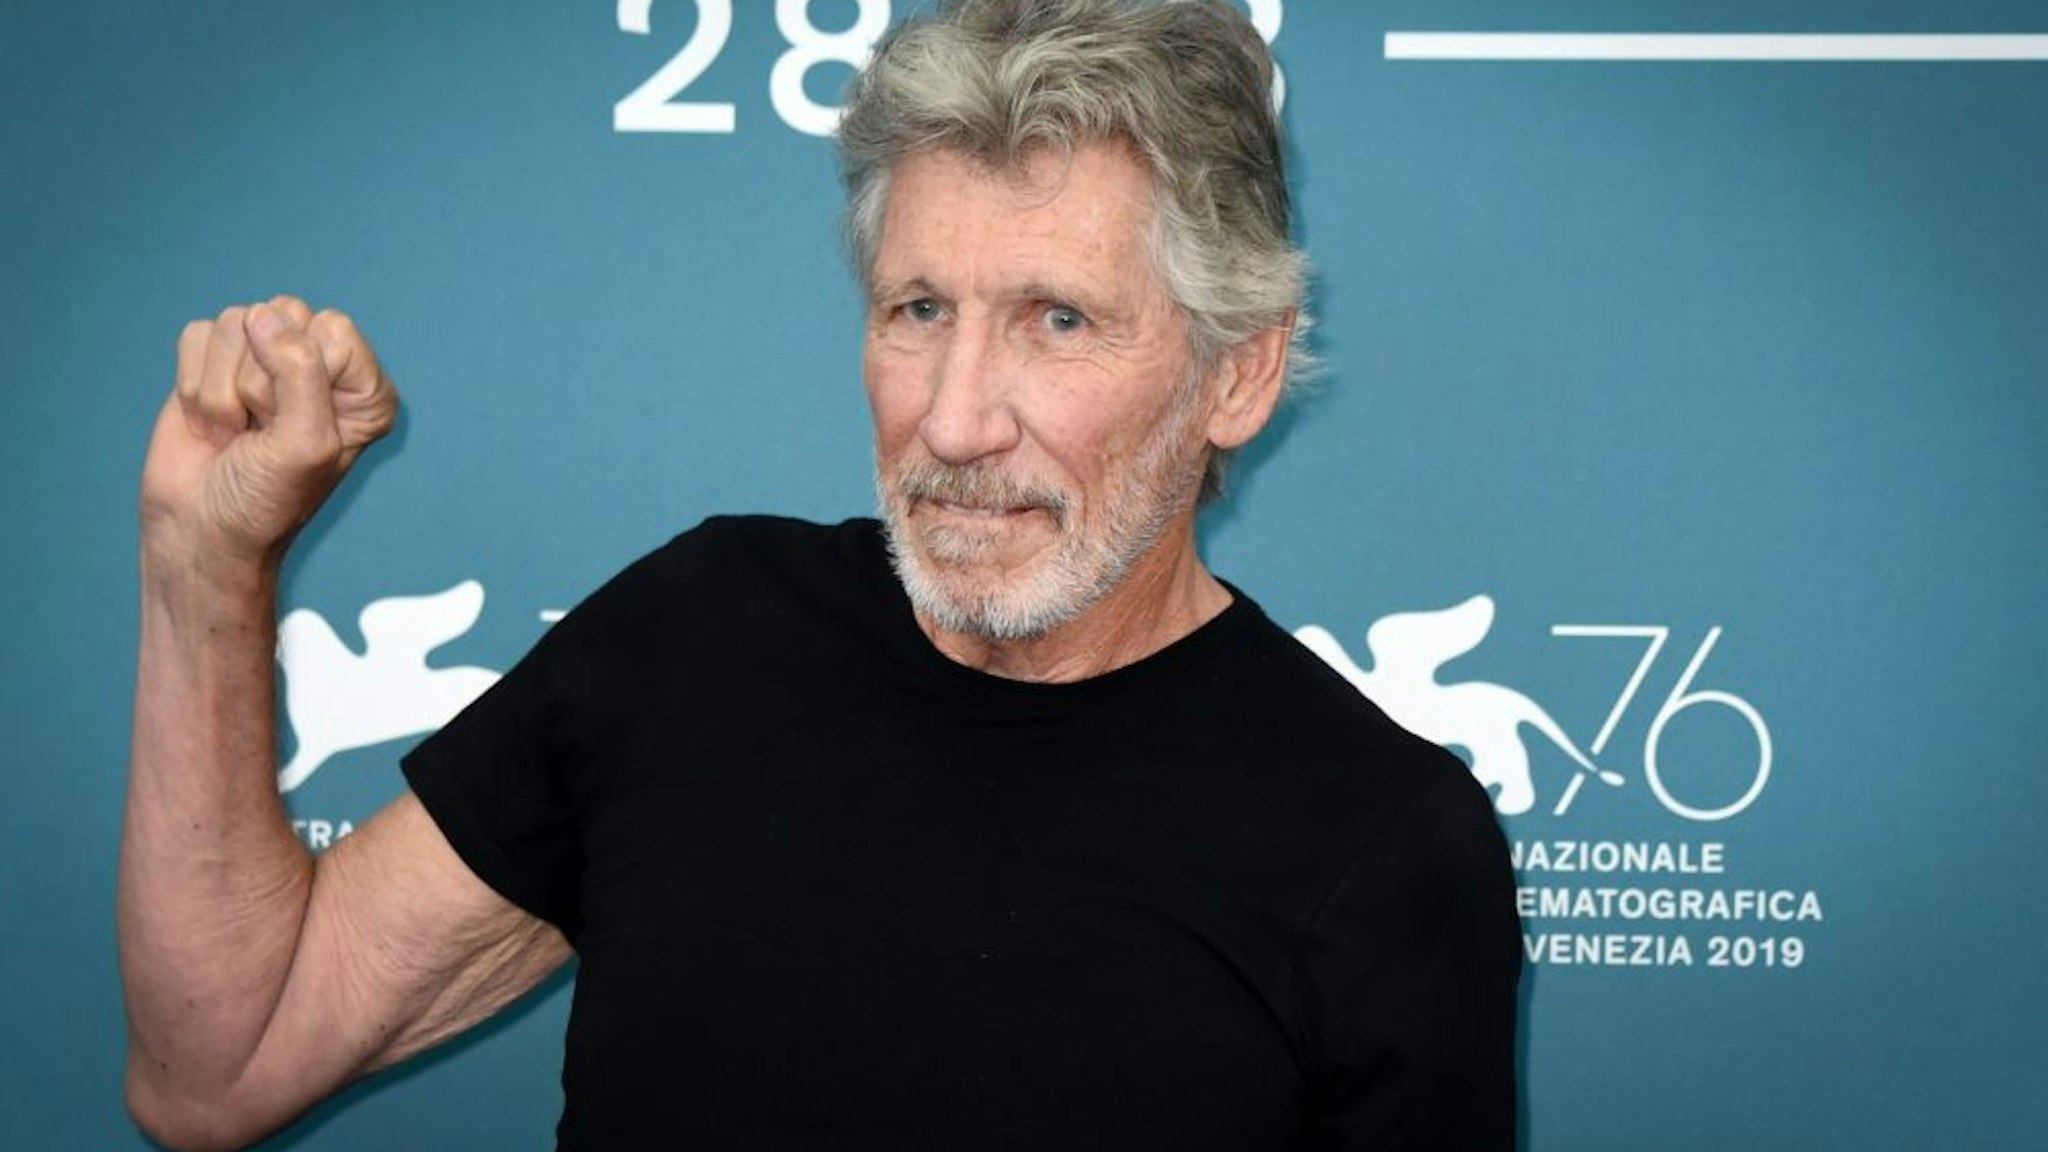 VENICE, ITALY - SEPTEMBER 06: Roger Waters attends the "Roger Waters Us + Them" Photocall during the 76th Venice Film Festival at on September 06, 2019 in Venice, Italy.